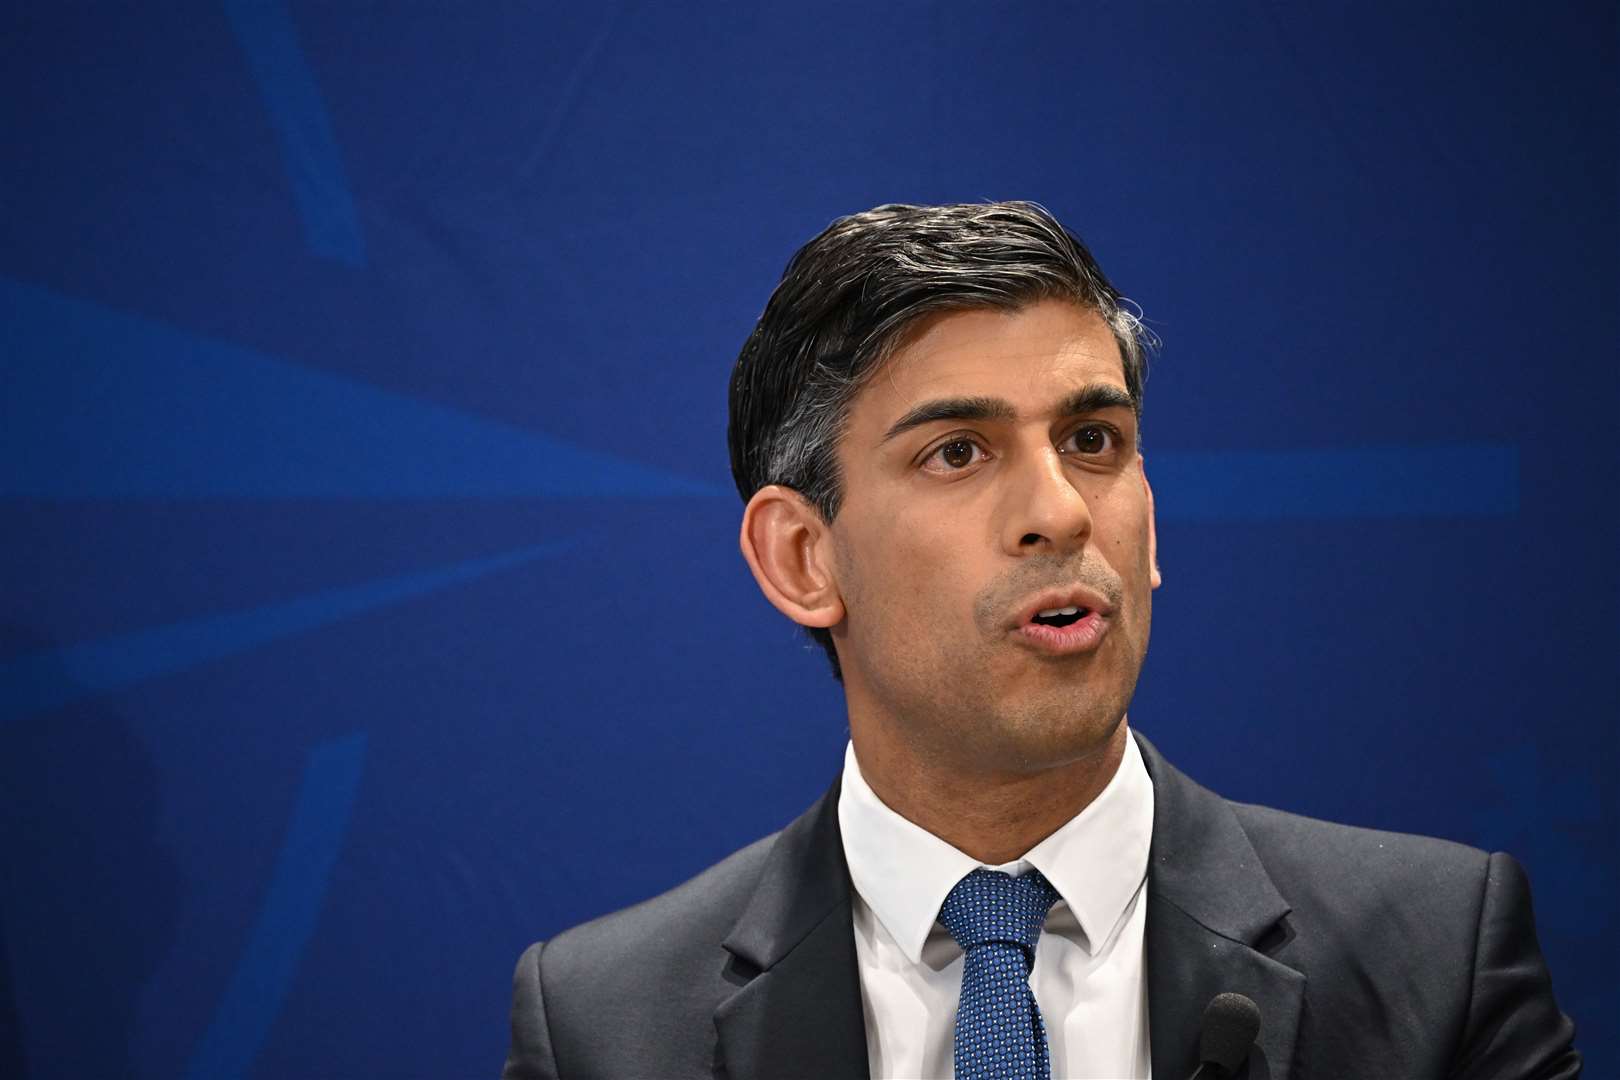 Prime Minister Rishi Sunak said the Government has already taken actions that are in line with many of the committee’s recommendations (Paul Ellis/PA)